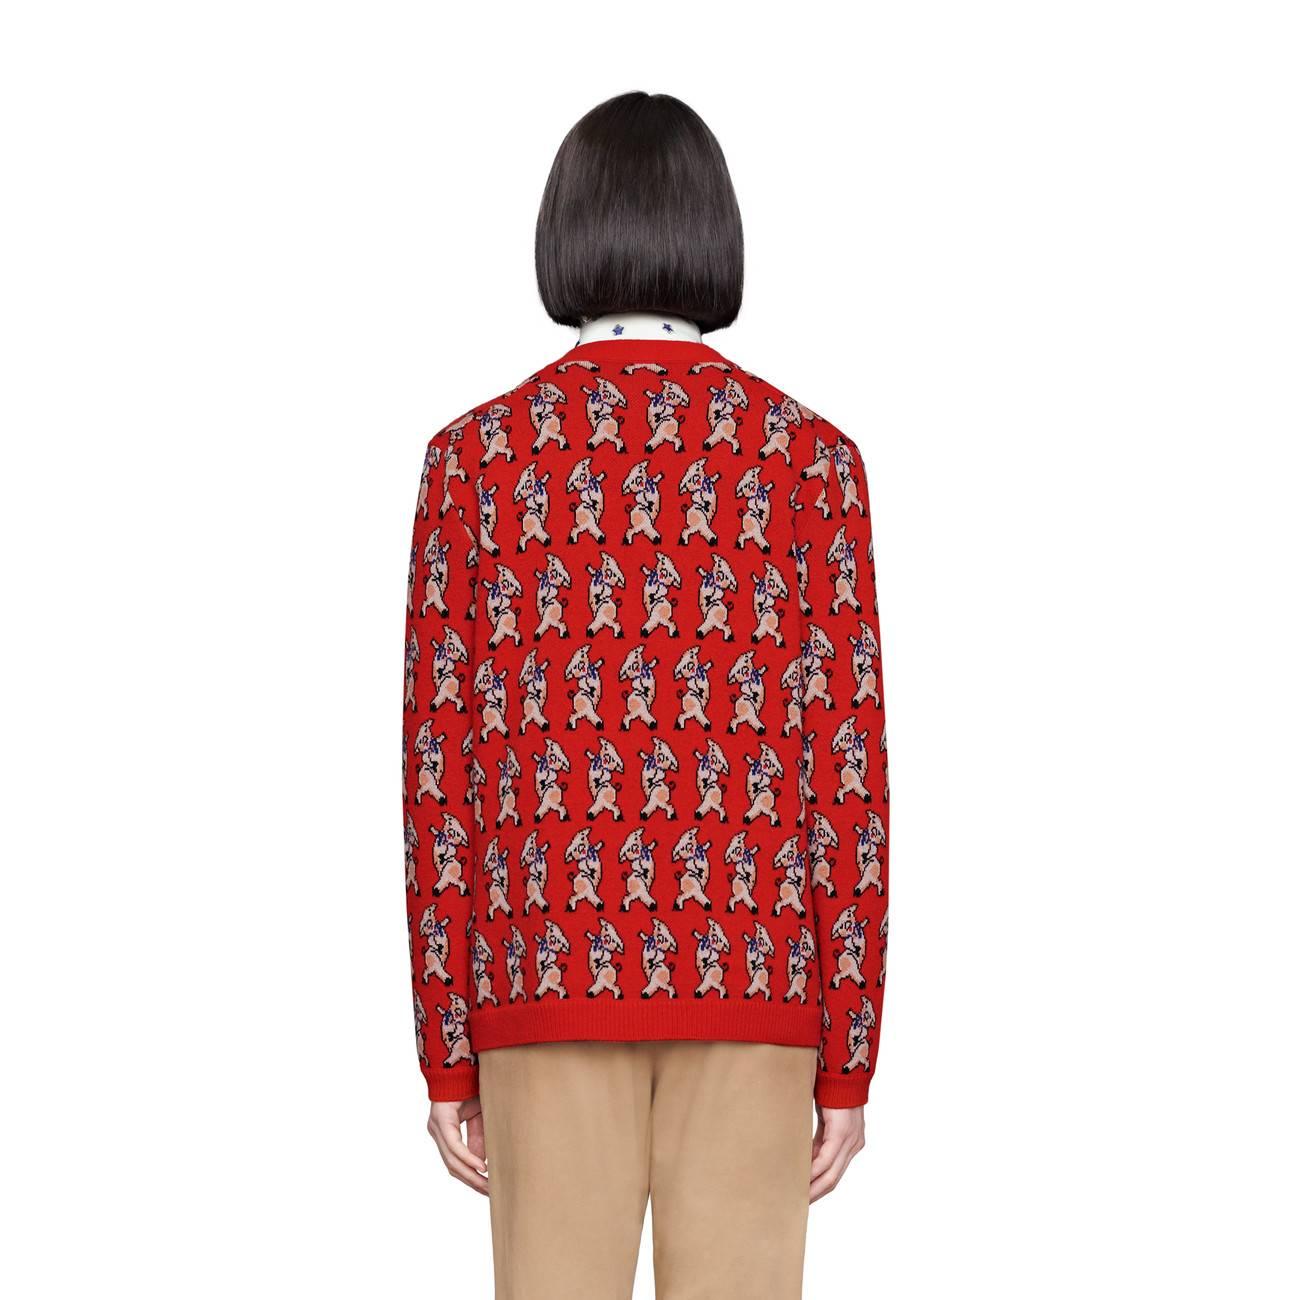 Gucci Men's Piglet Wool Cardigan in Red 